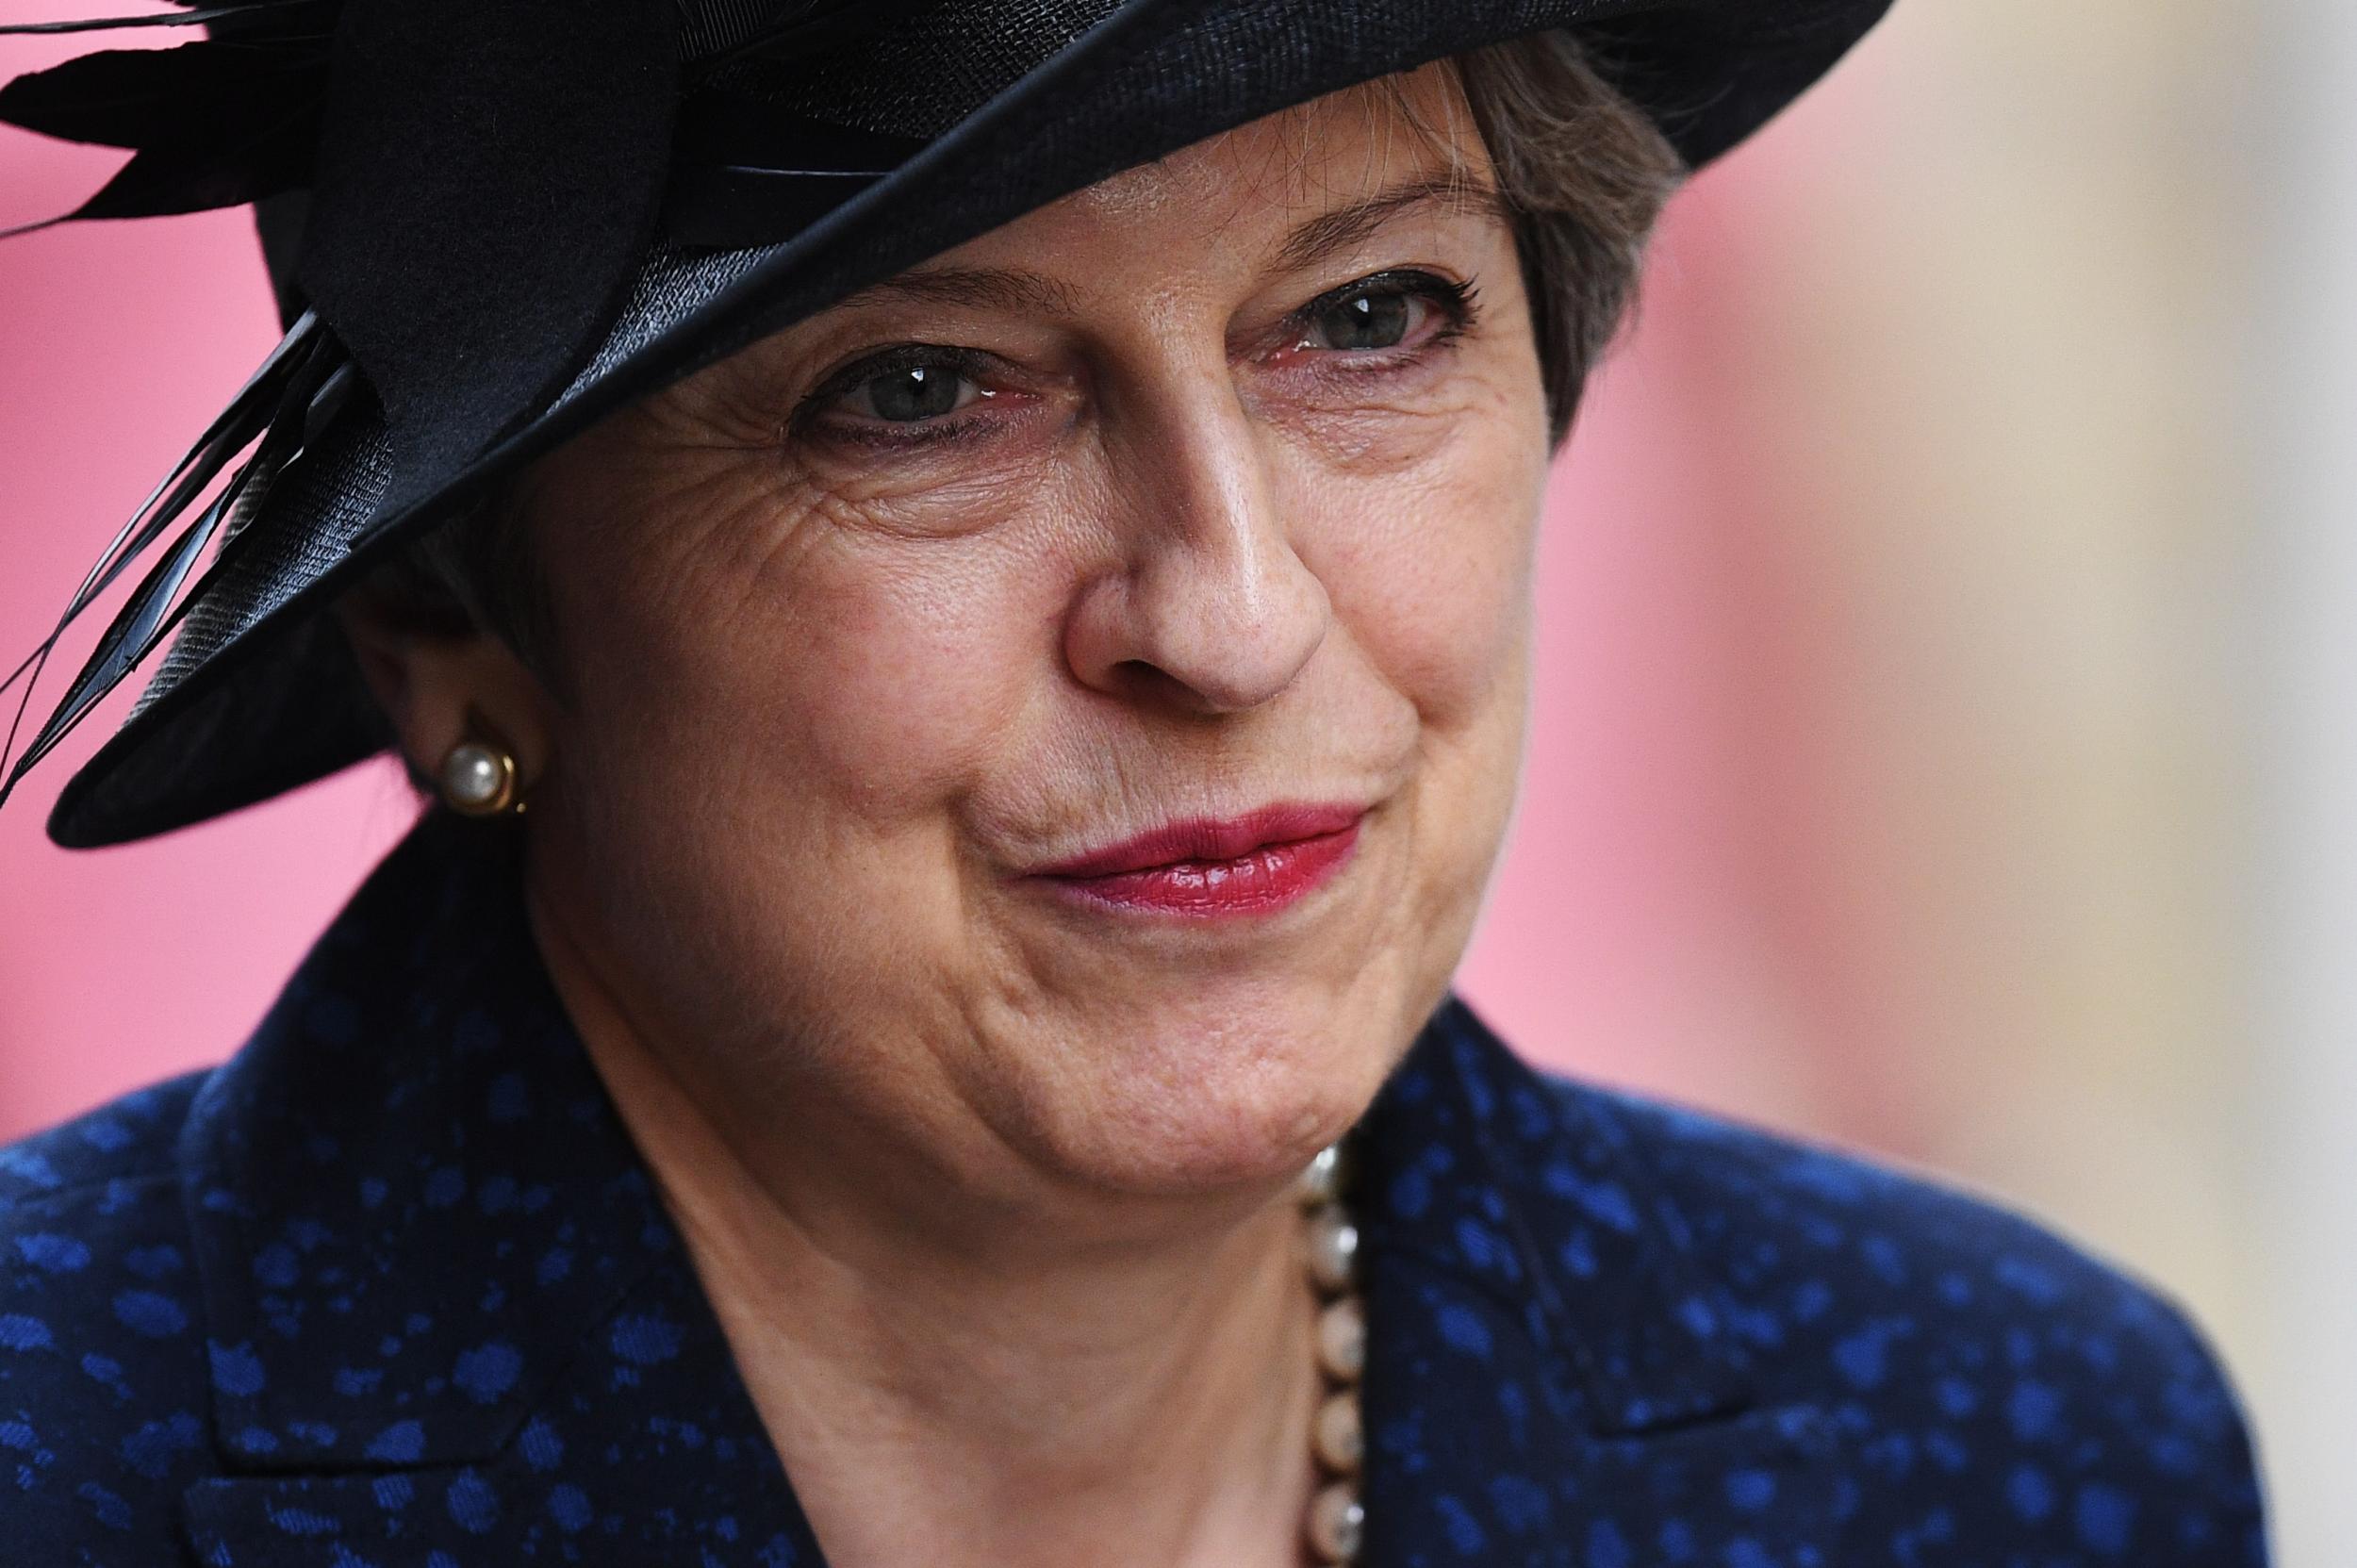 The Prime Minister attends commemorations marking the centenary of Passchendaele as her ministers differ over Brexit